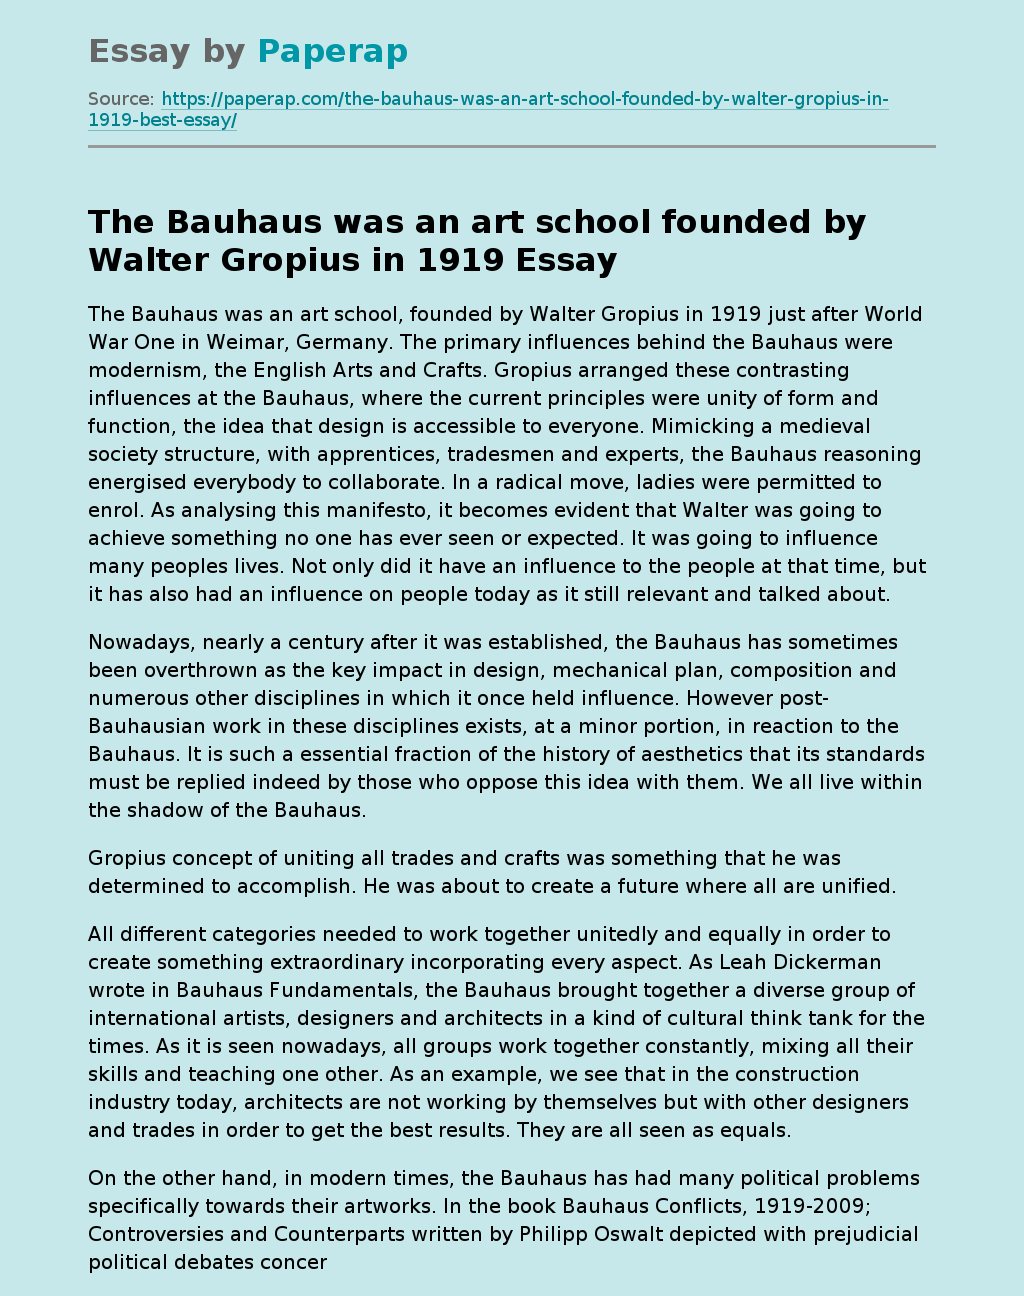 The Bauhaus was an art school founded by Walter Gropius in 1919